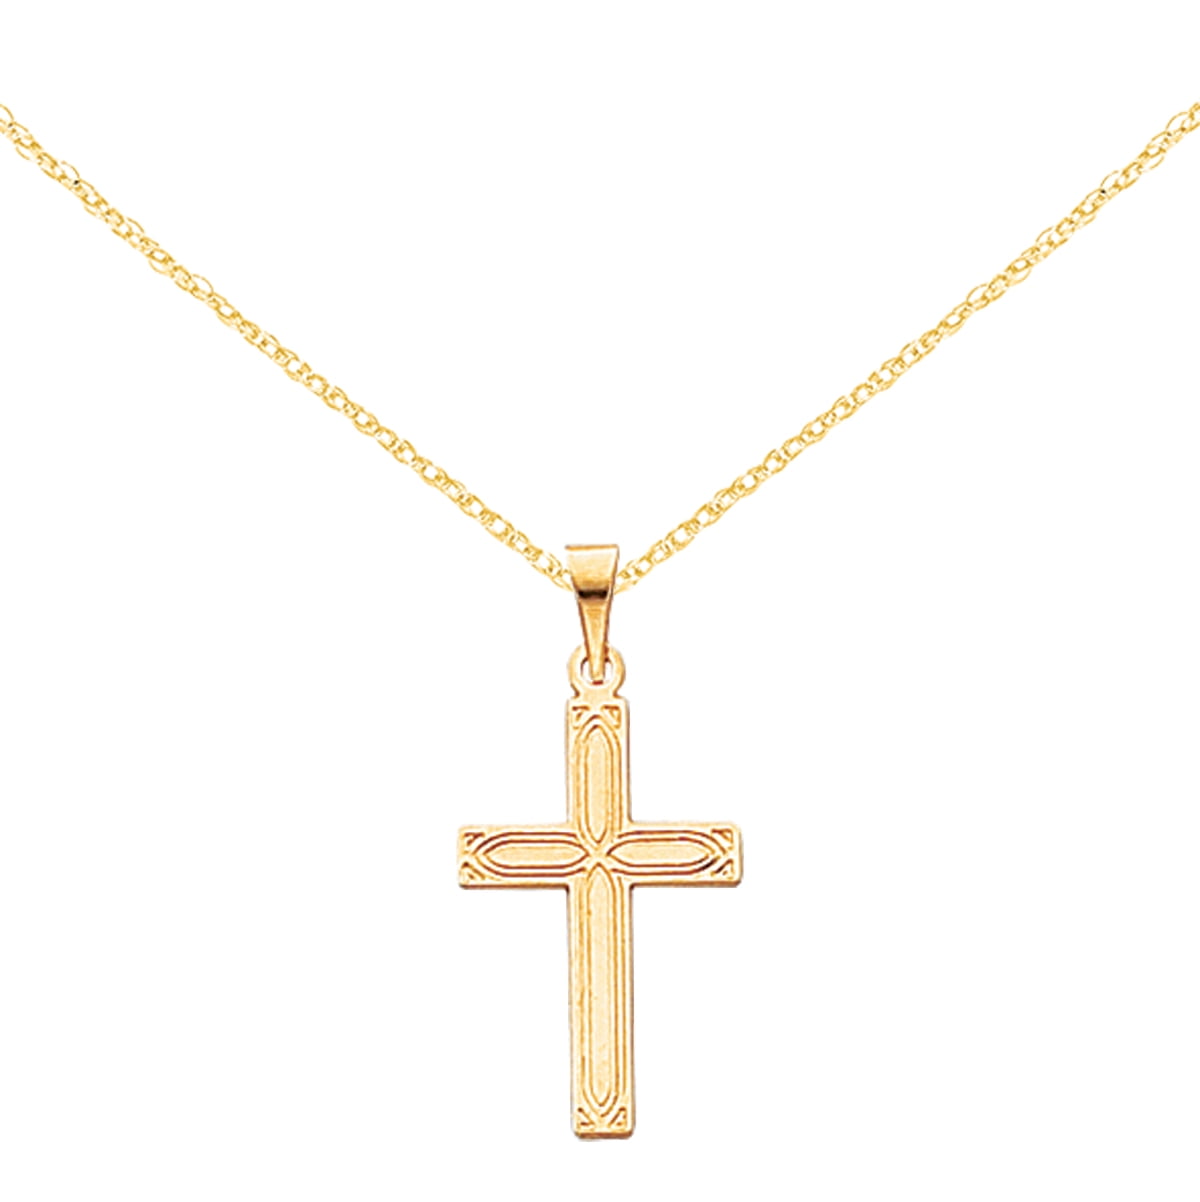 Primal Gold 14 Karat Yellow Gold Solid Cross Pendant with 18-inch Cable ...